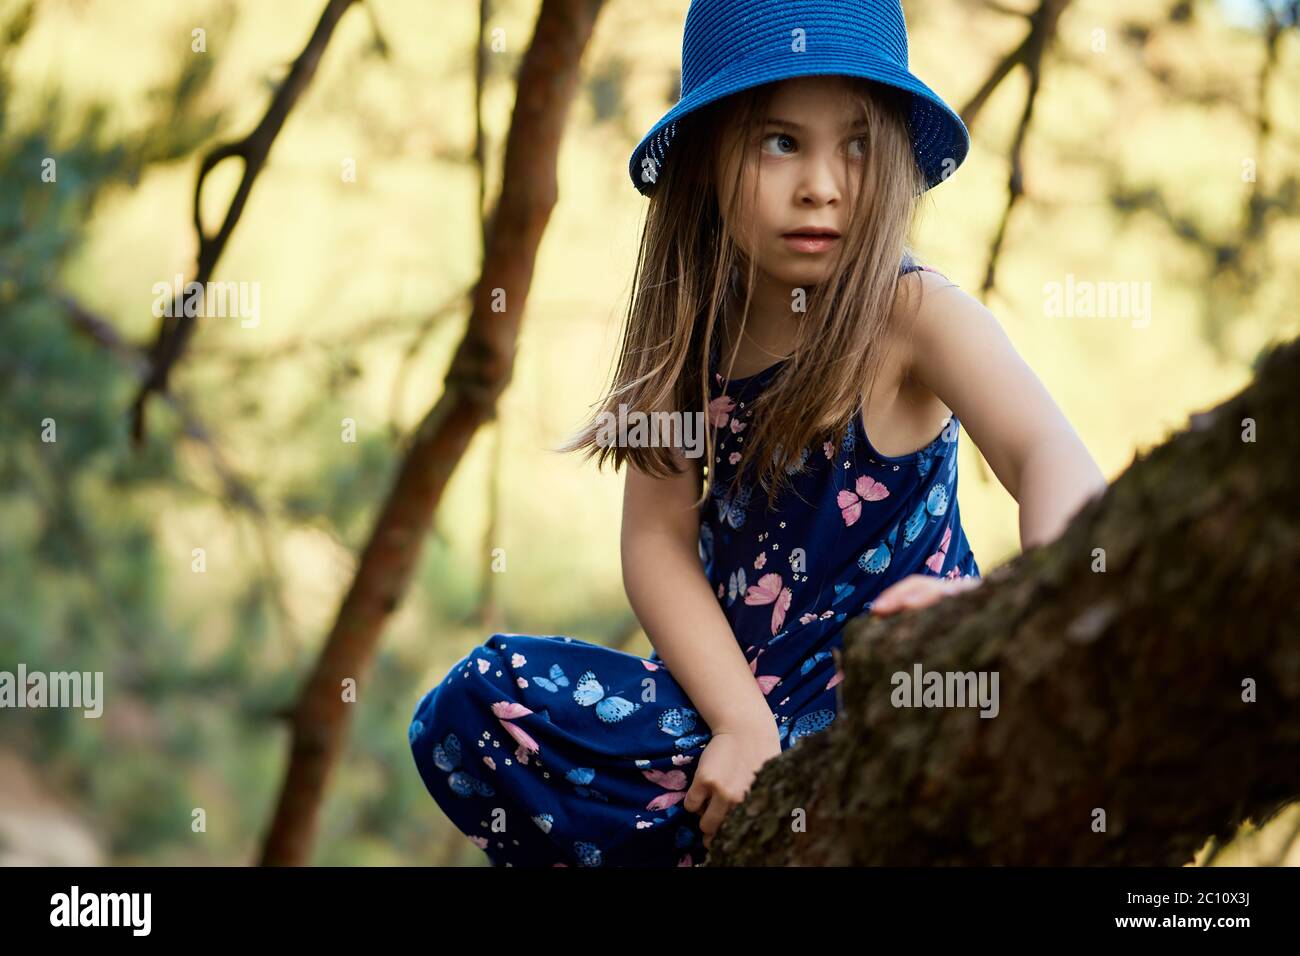 two girls in summer dresses are climbing a tree in the forest Stock Photo